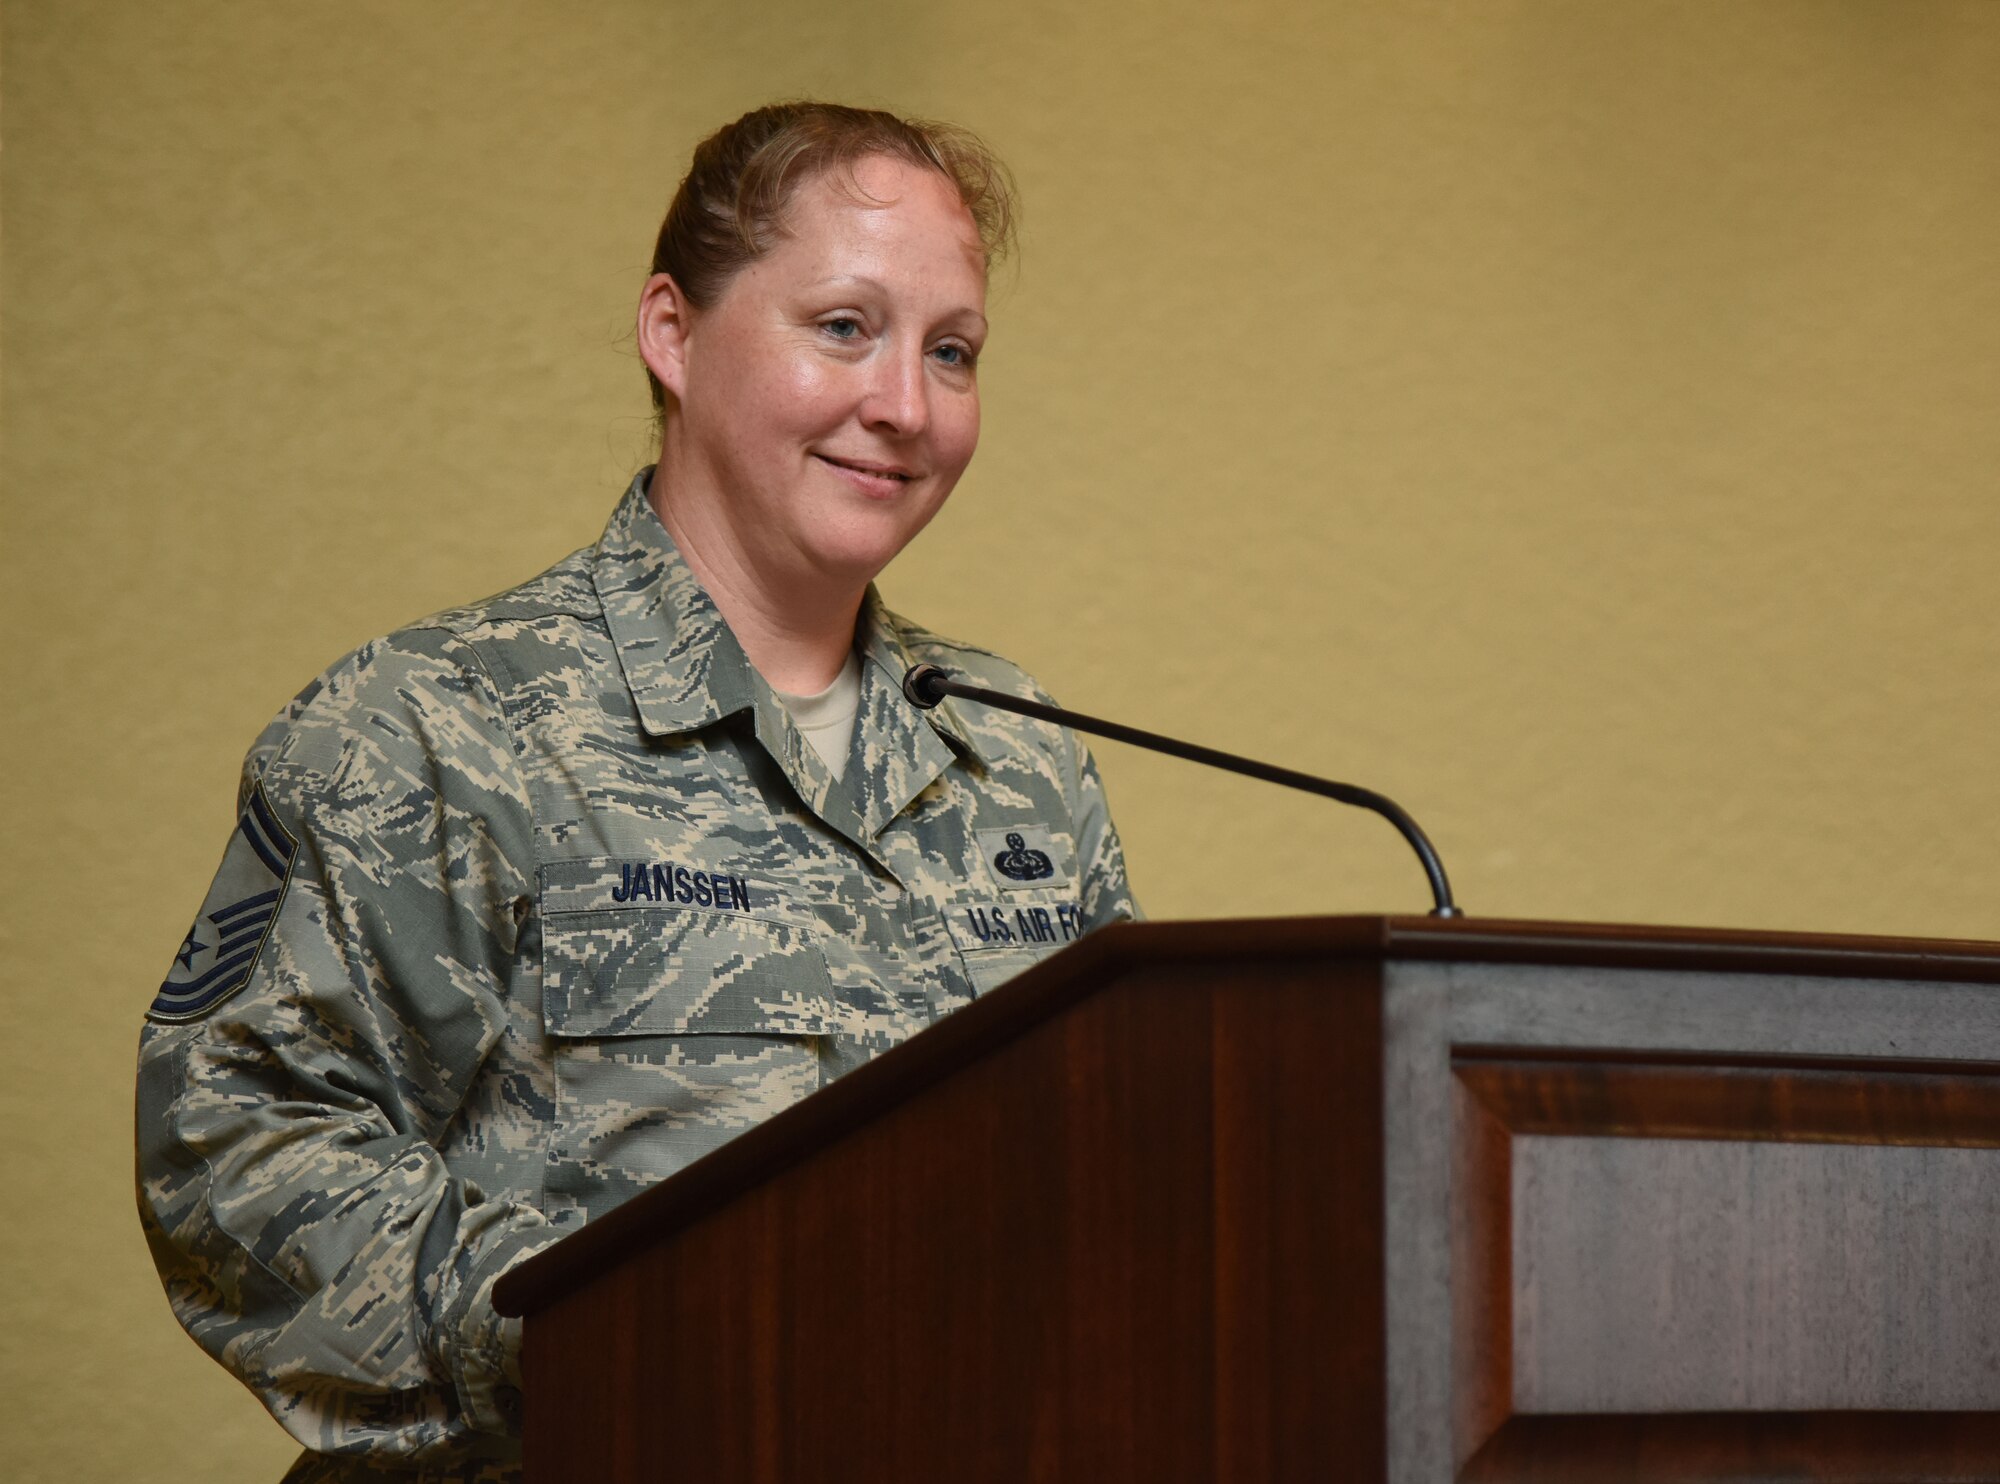 U.S. Air Force Senior Master Sgt. Rebecca Janssen, 81st Engineering Installation Squadron operations flight superintendent, delivers remarks during the Women’s History Month Luncheon at the Bay Breeze Event Center March 27, 2018, on Keesler Air Force Base, Mississippi. The theme for this year’s event is “Nevertheless She Persisted.” (U.S. Air Force photo by Kemberly Groue)